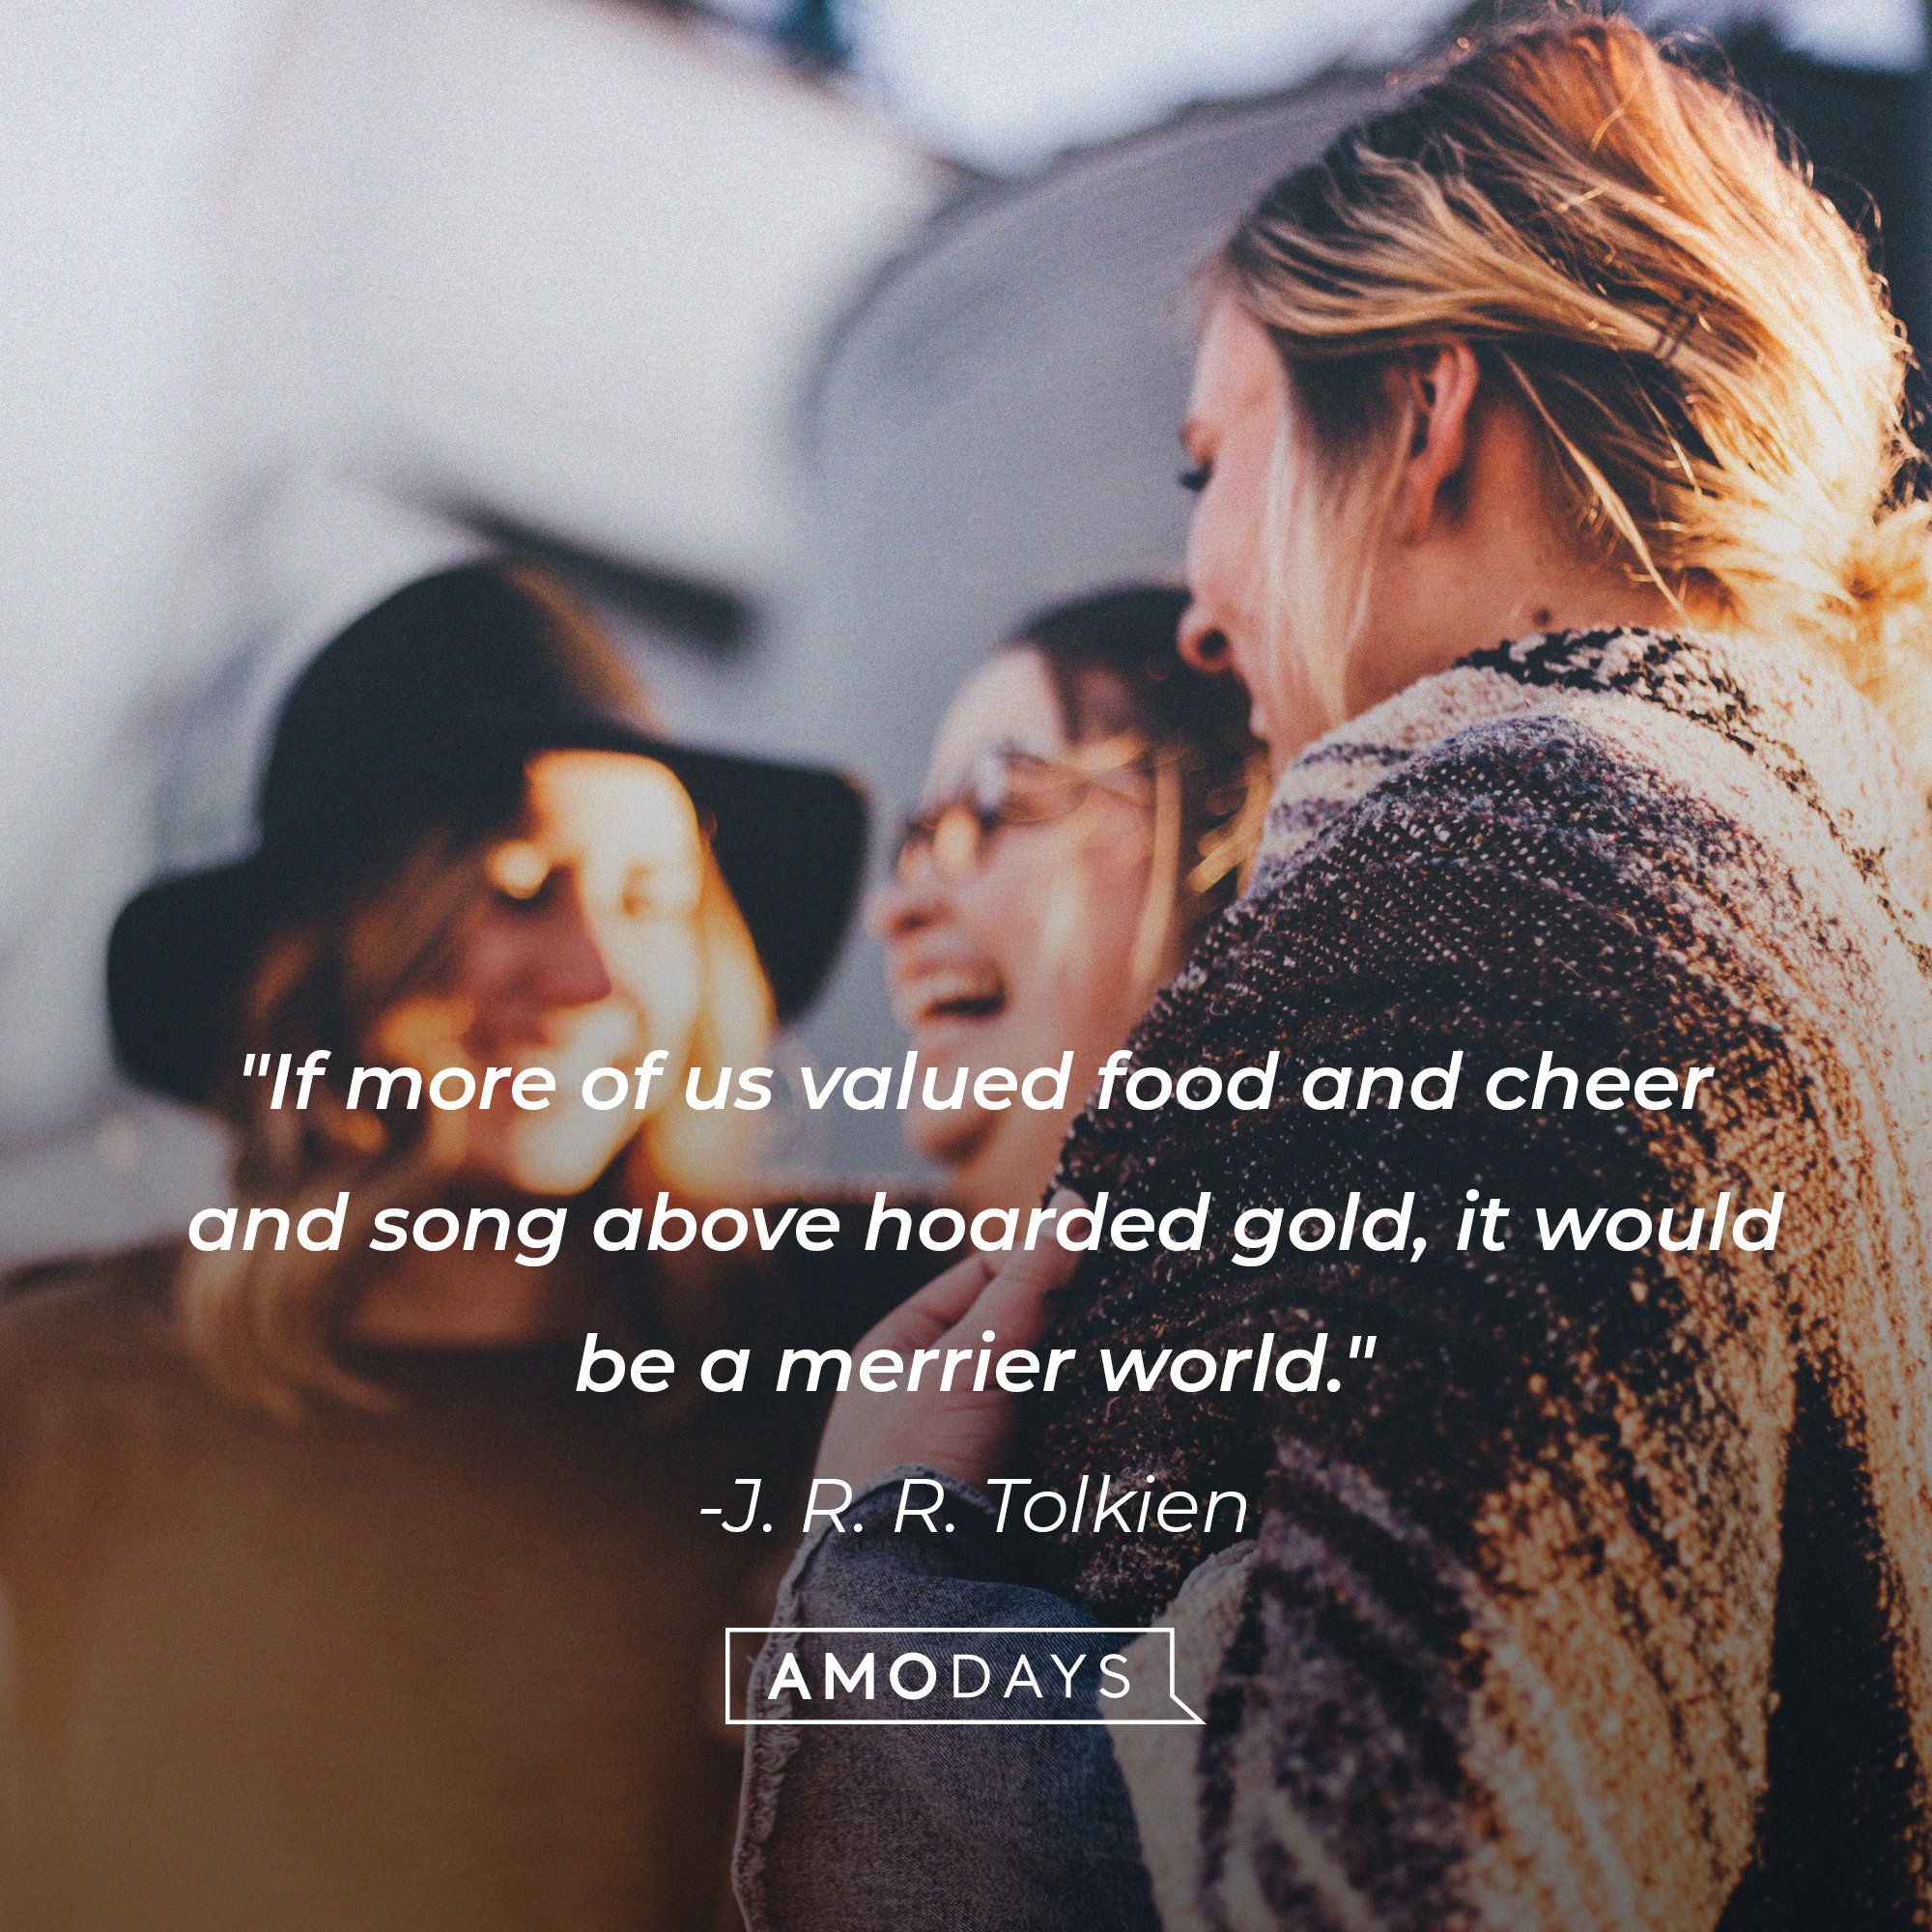 J. R. R. Tolkien’s quote: "If more of us valued food and cheer and song above hoarded gold, it would be a merrier world." | Image: AmoDays